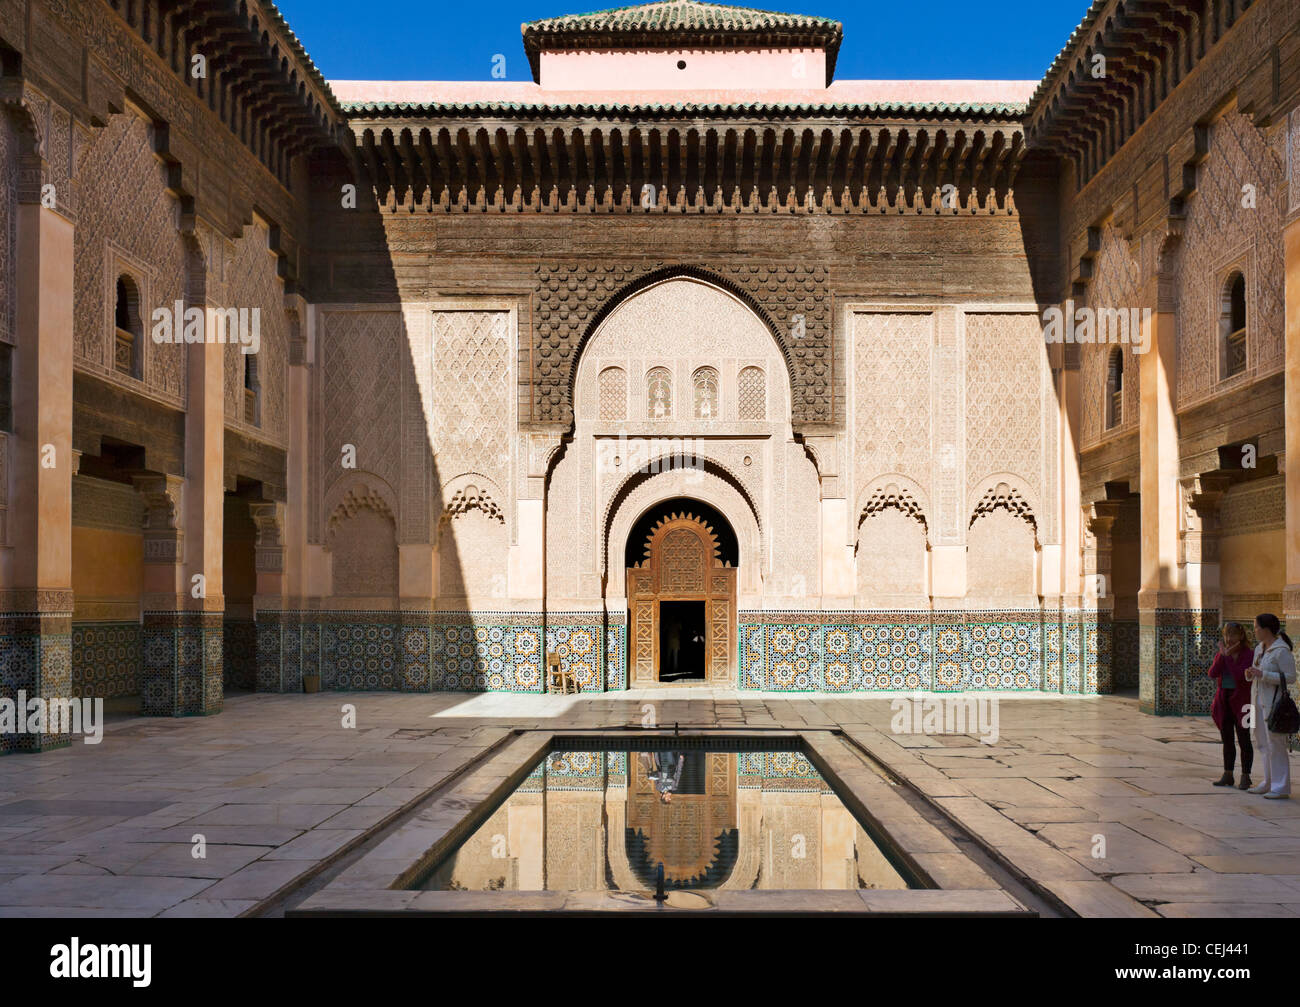 Courtyard of the Ben Yousse Medersa (Madrasa), Medina district, Marrakech, Morocco, North Africa Stock Photo